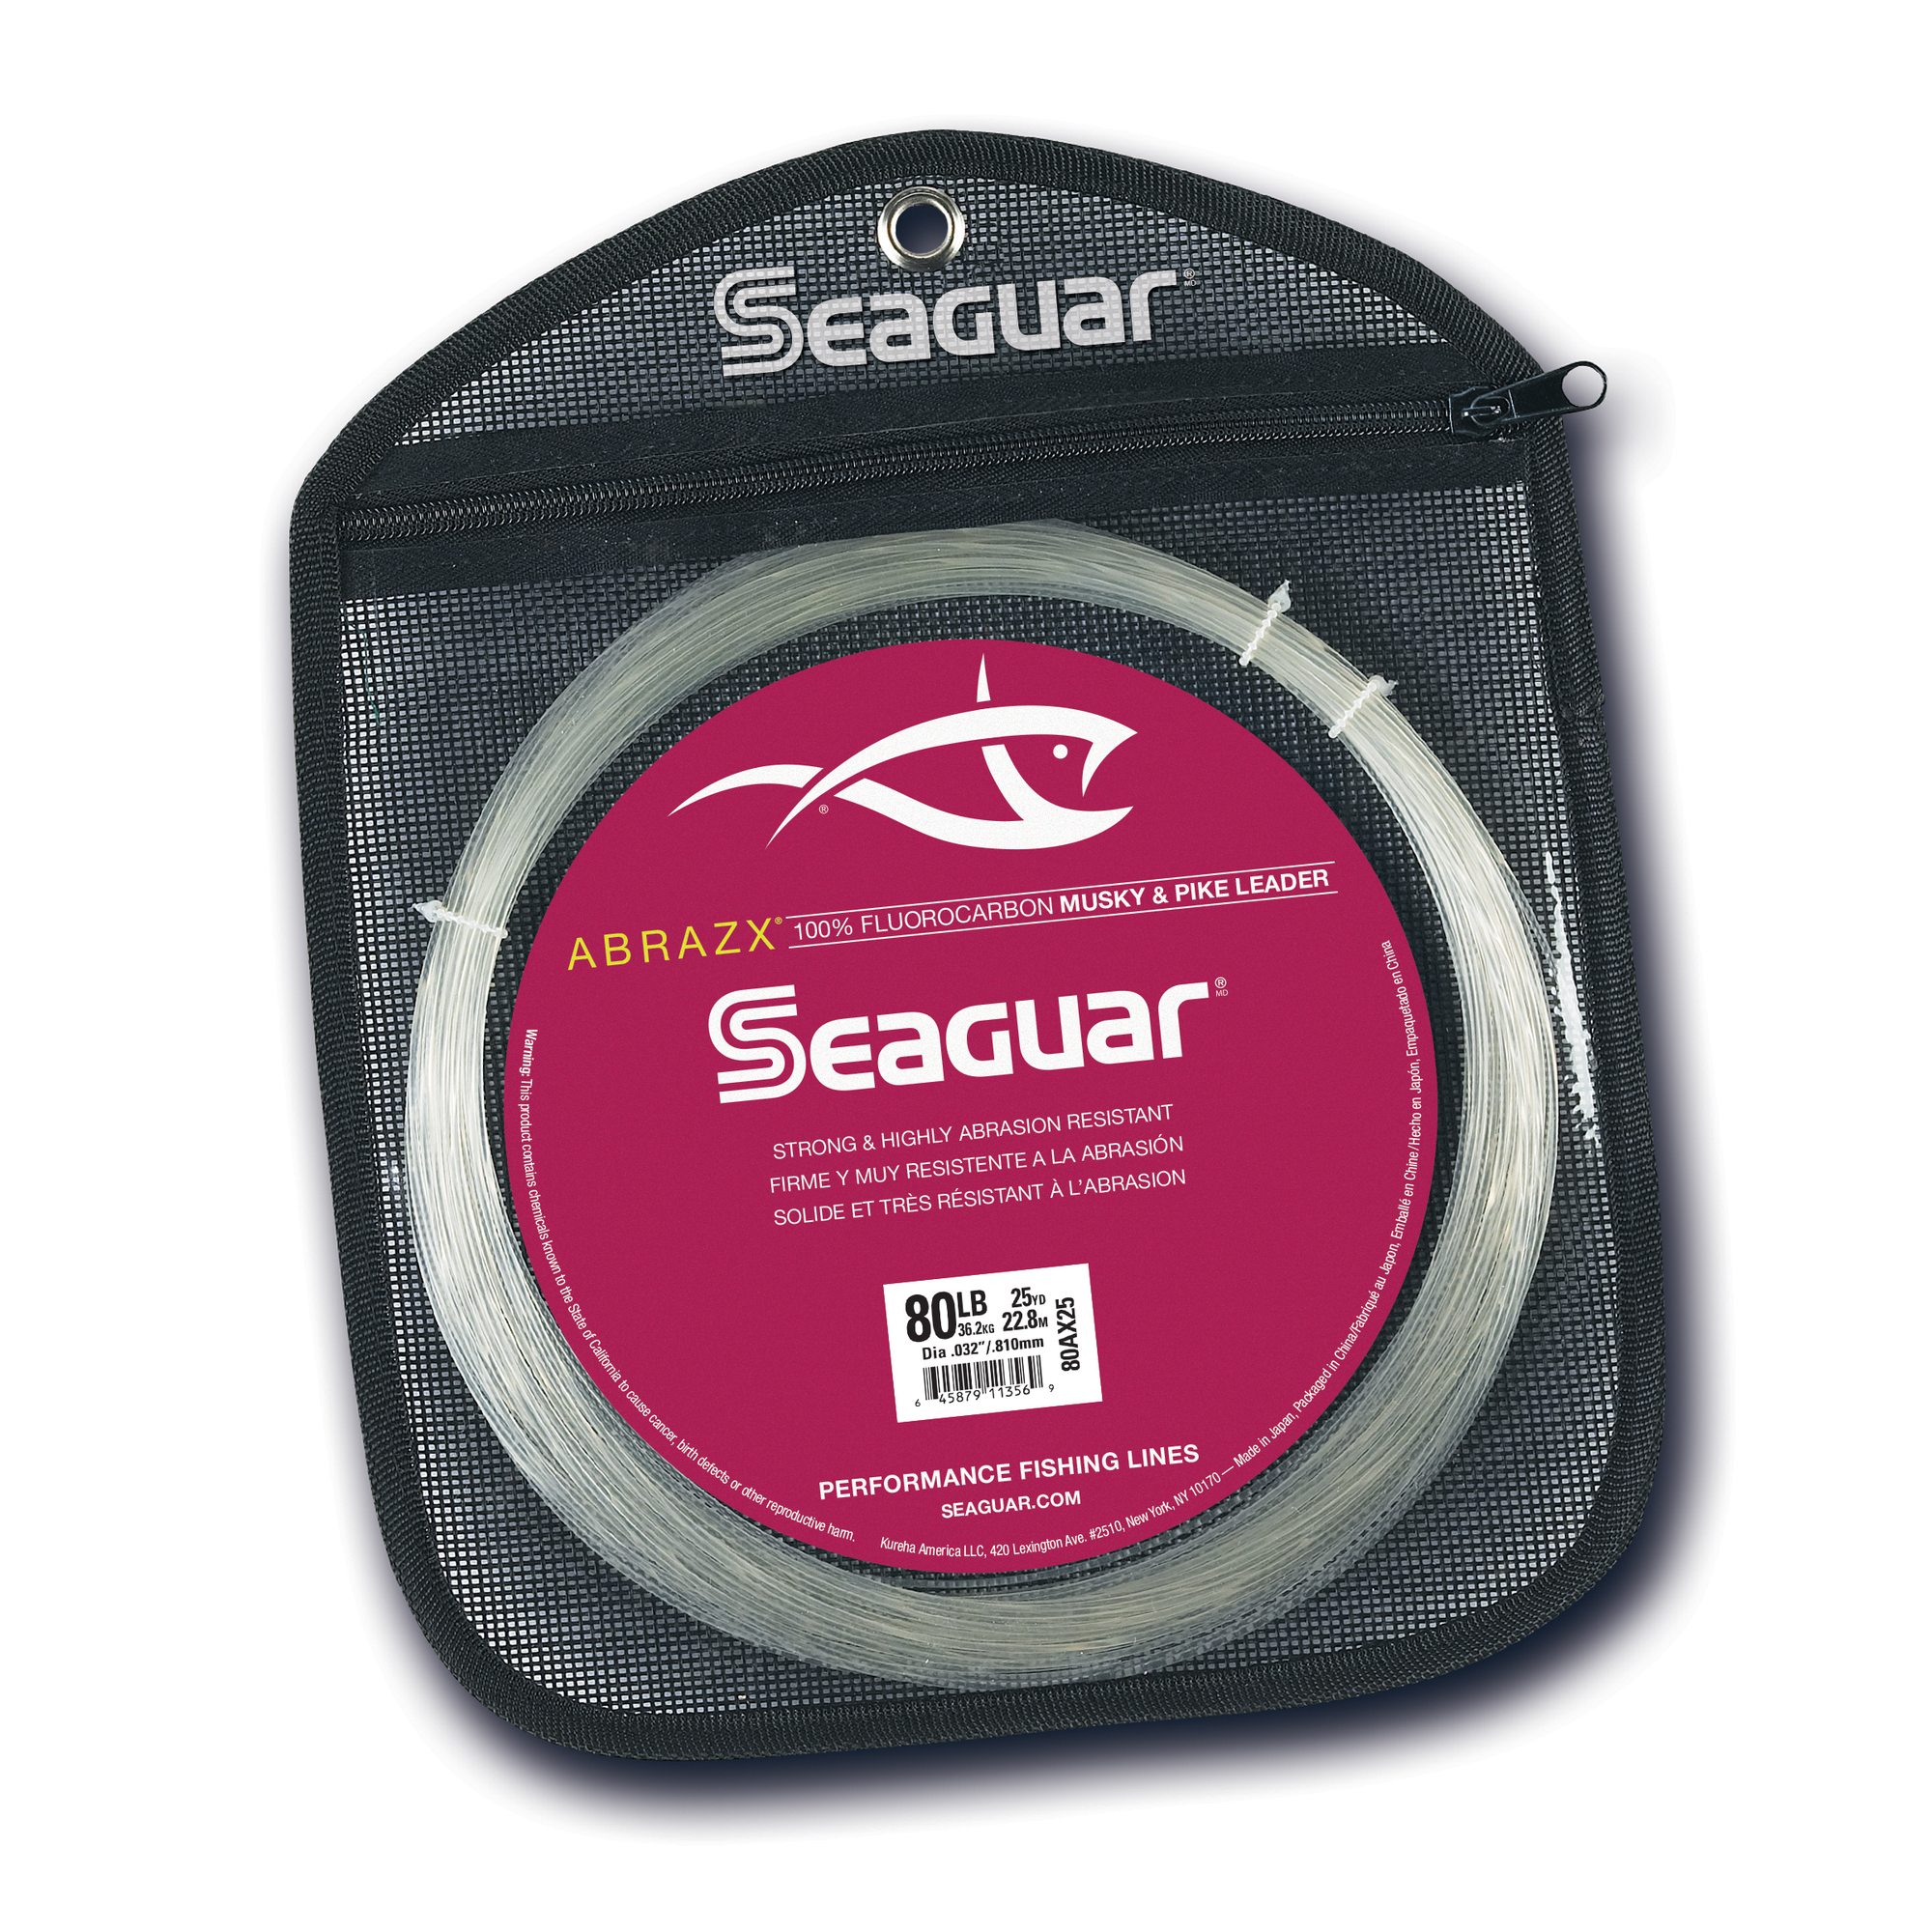 Seaguar 80AX25 AbrazX 100% Fluorocarbon Musky/Pike Leader 80lb